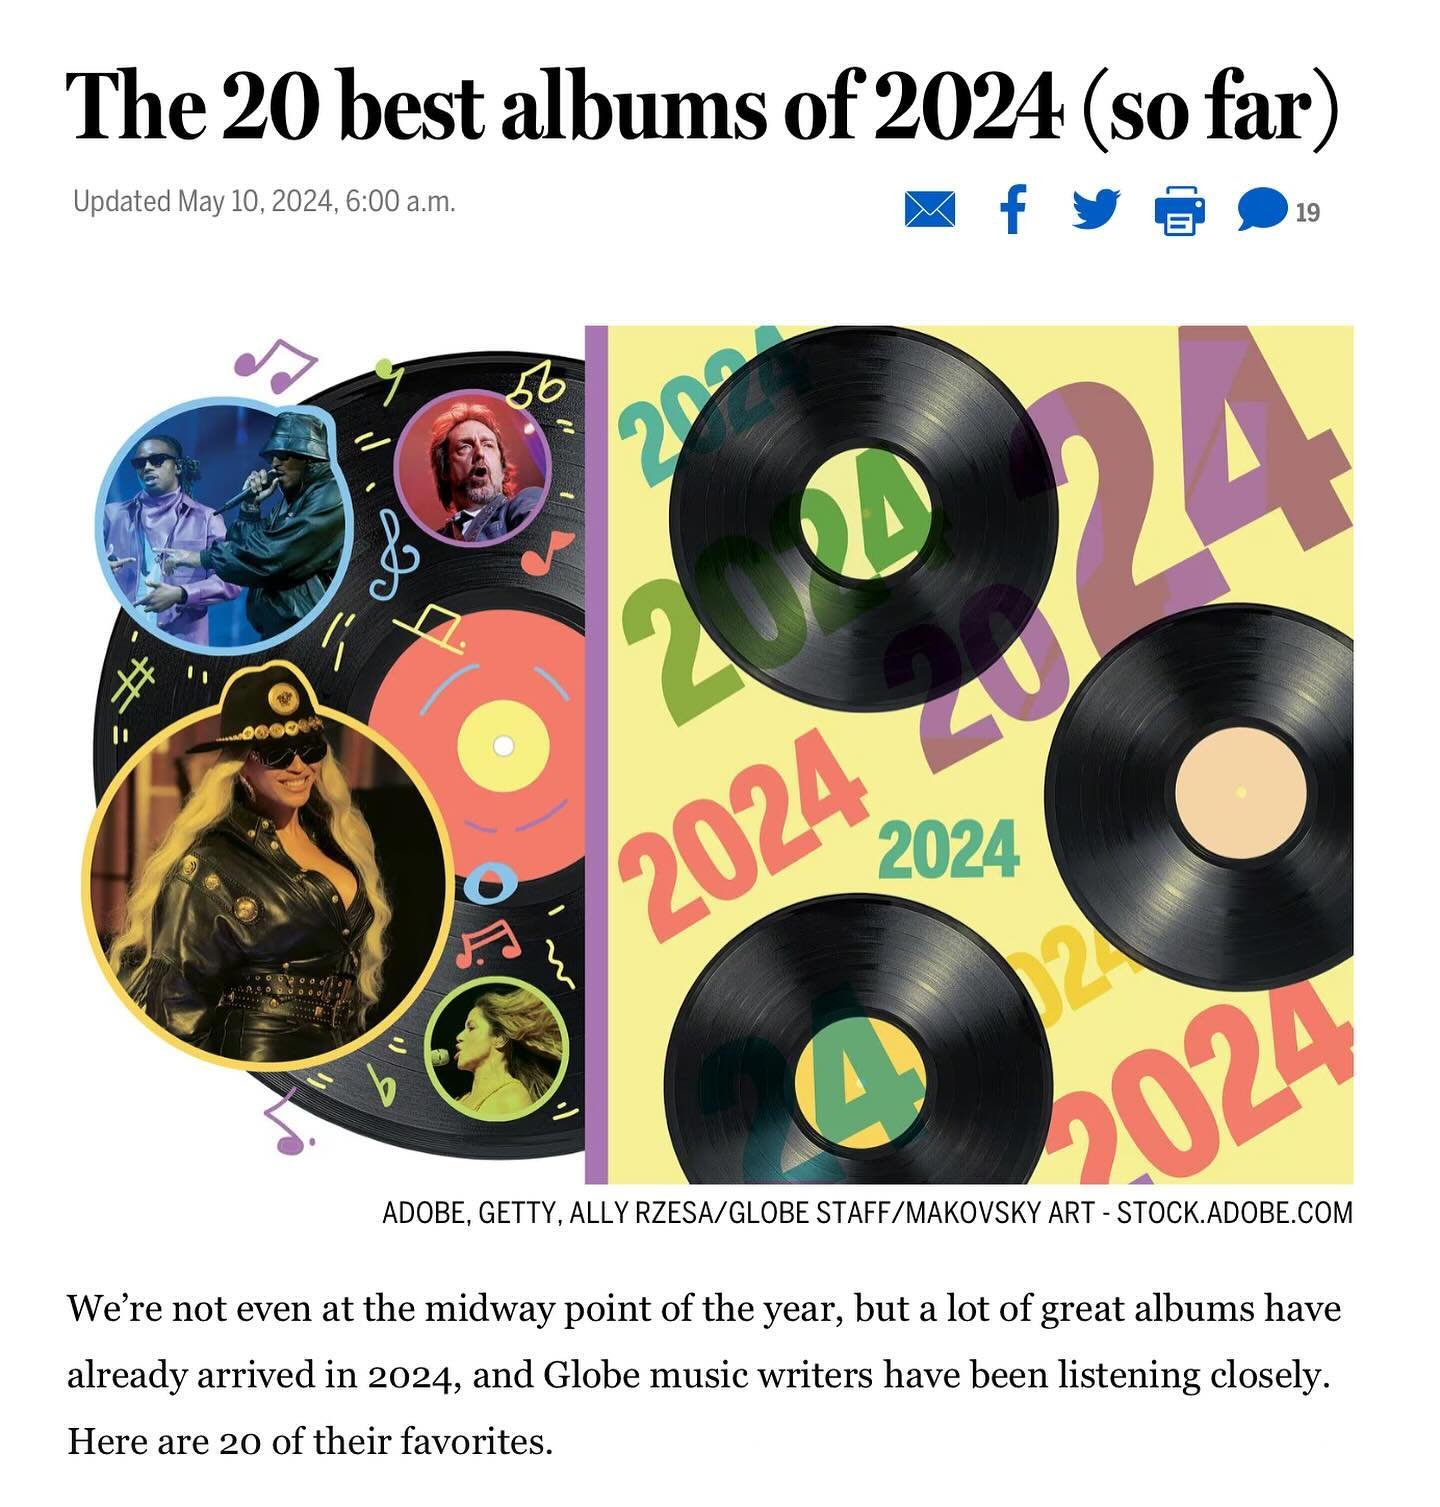 It&rsquo;s not every day you find yourself on a list with Beyonce! Huge thanks to the Boston Globe and Jon Garelick for including &ldquo;Riley&rdquo; on their list of &ldquo;The 20 Best Albums of 2024 (So Far).&rdquo; Honored to be amongst heroes lik